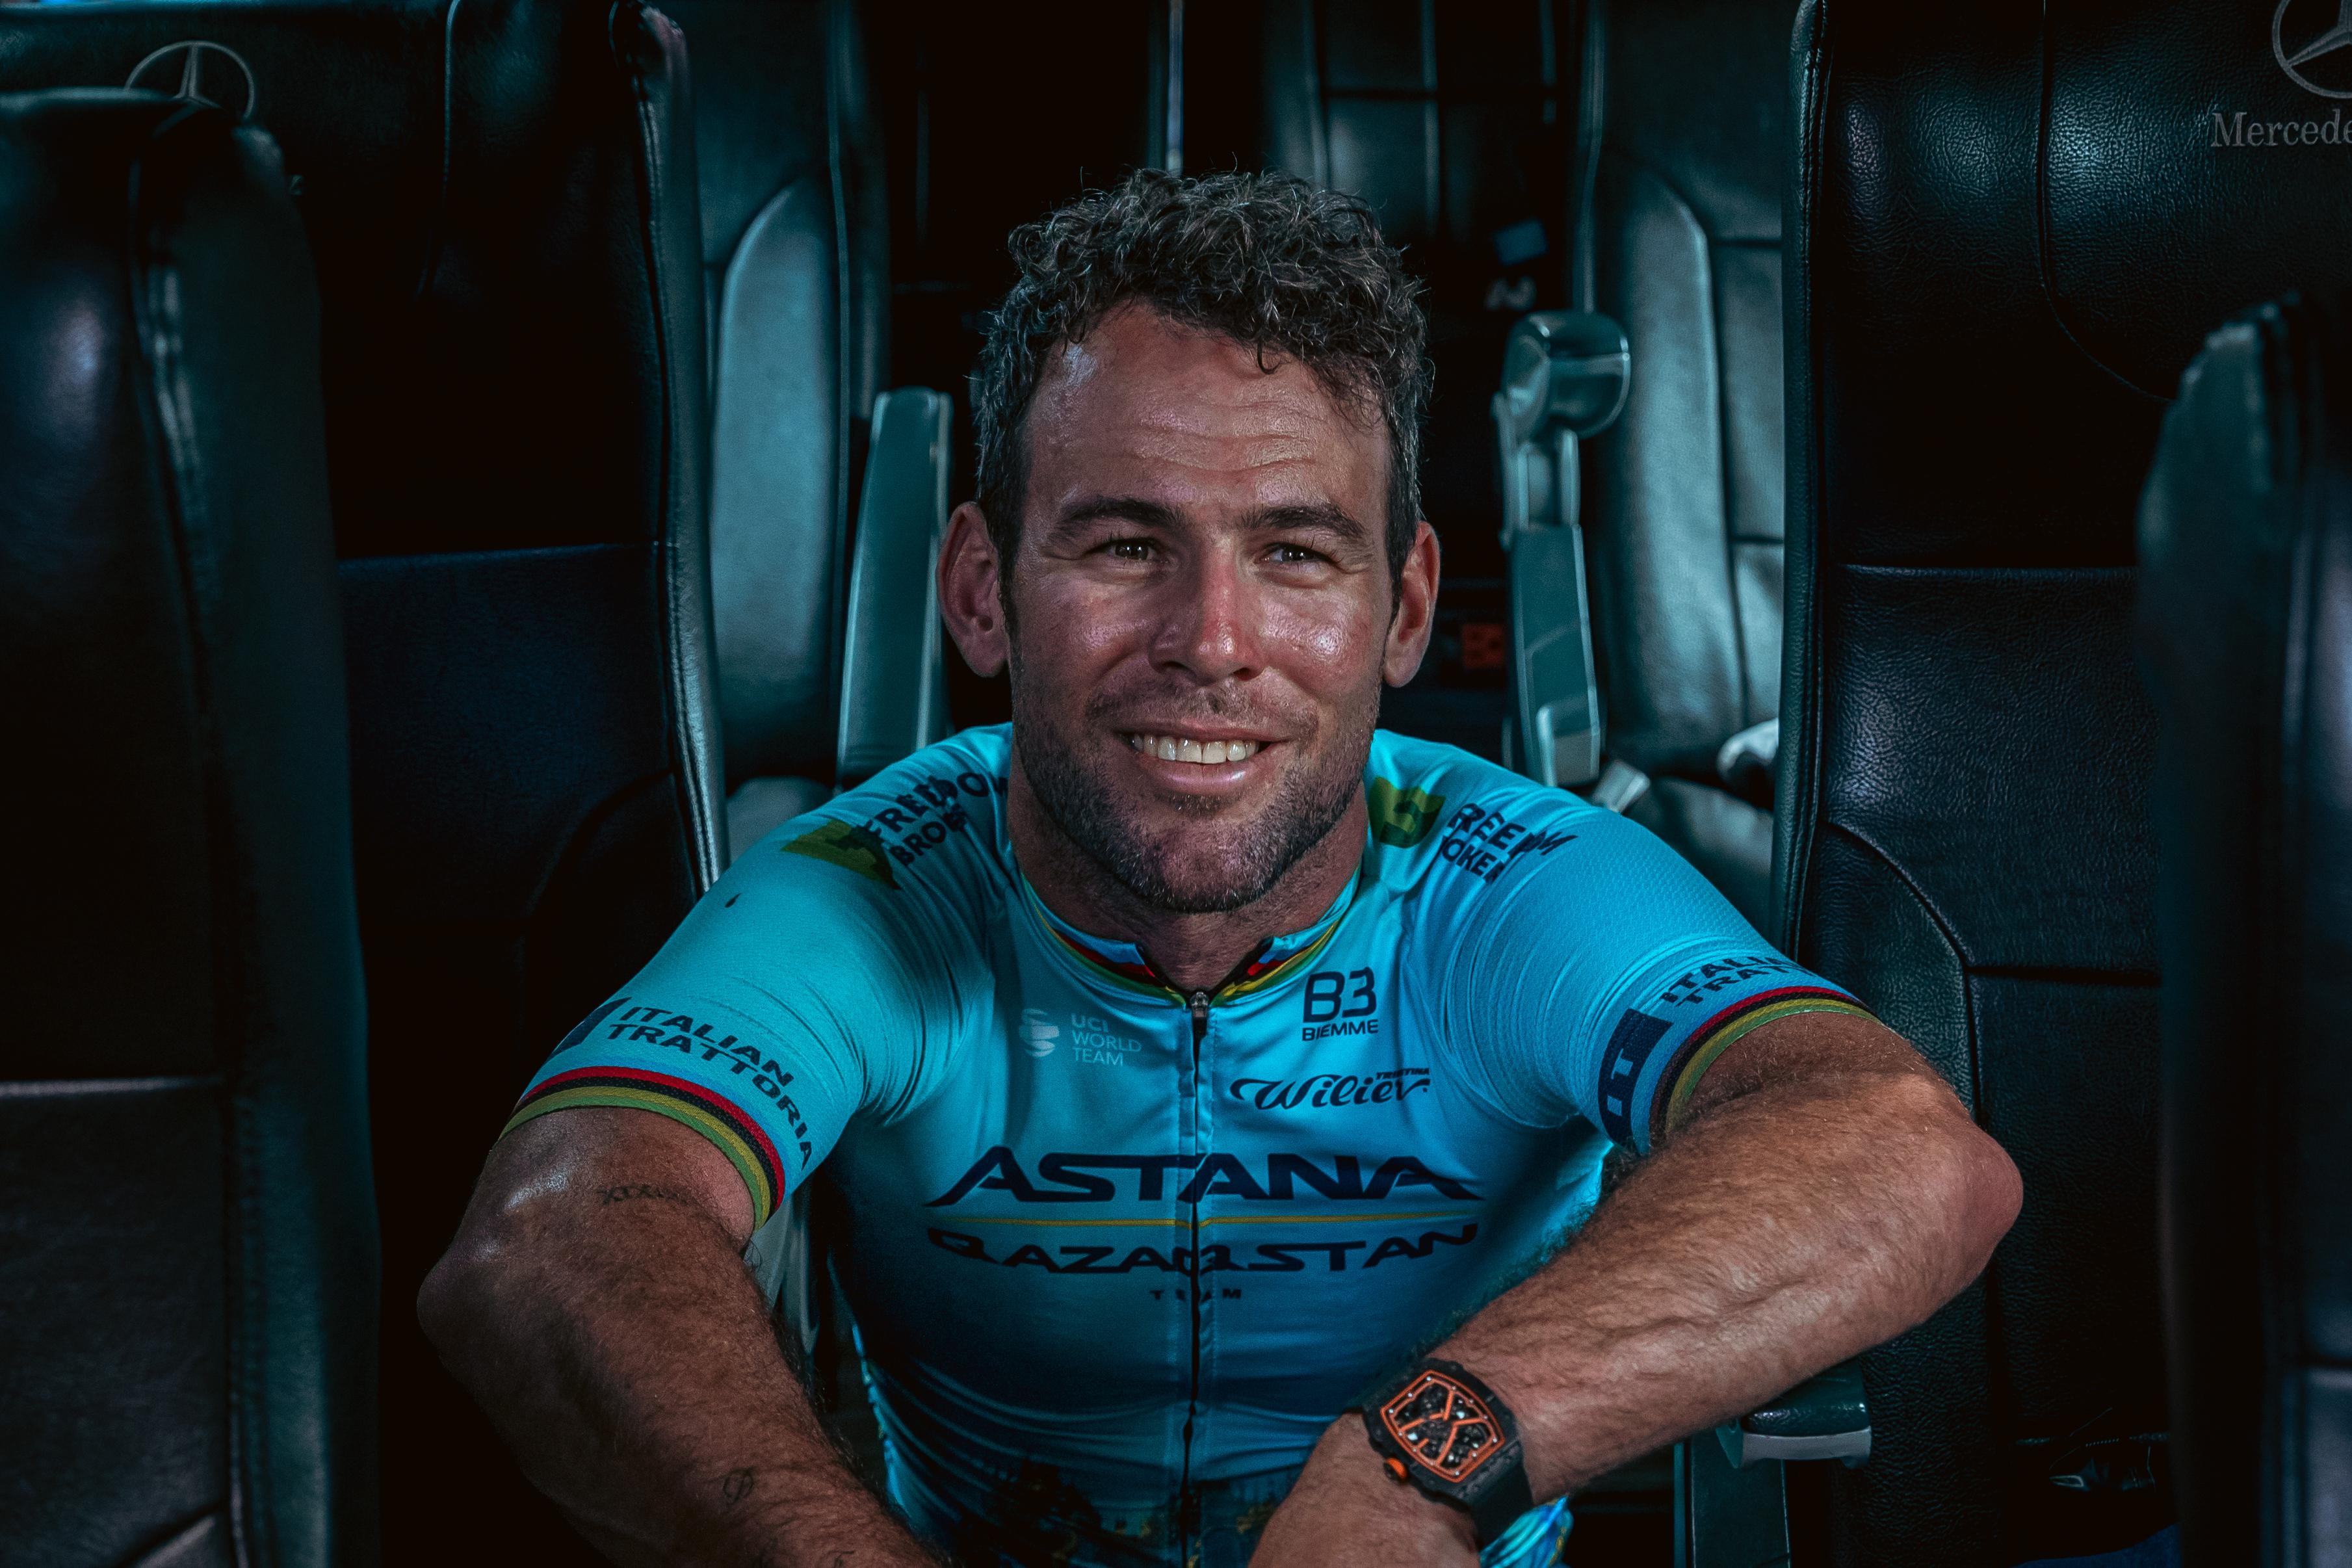 pa ready, mark cavendish, eddy merckx, florence, tour de france, turin, british, i have nothing to lose: mark cavendish ready for one more shot at tdf history